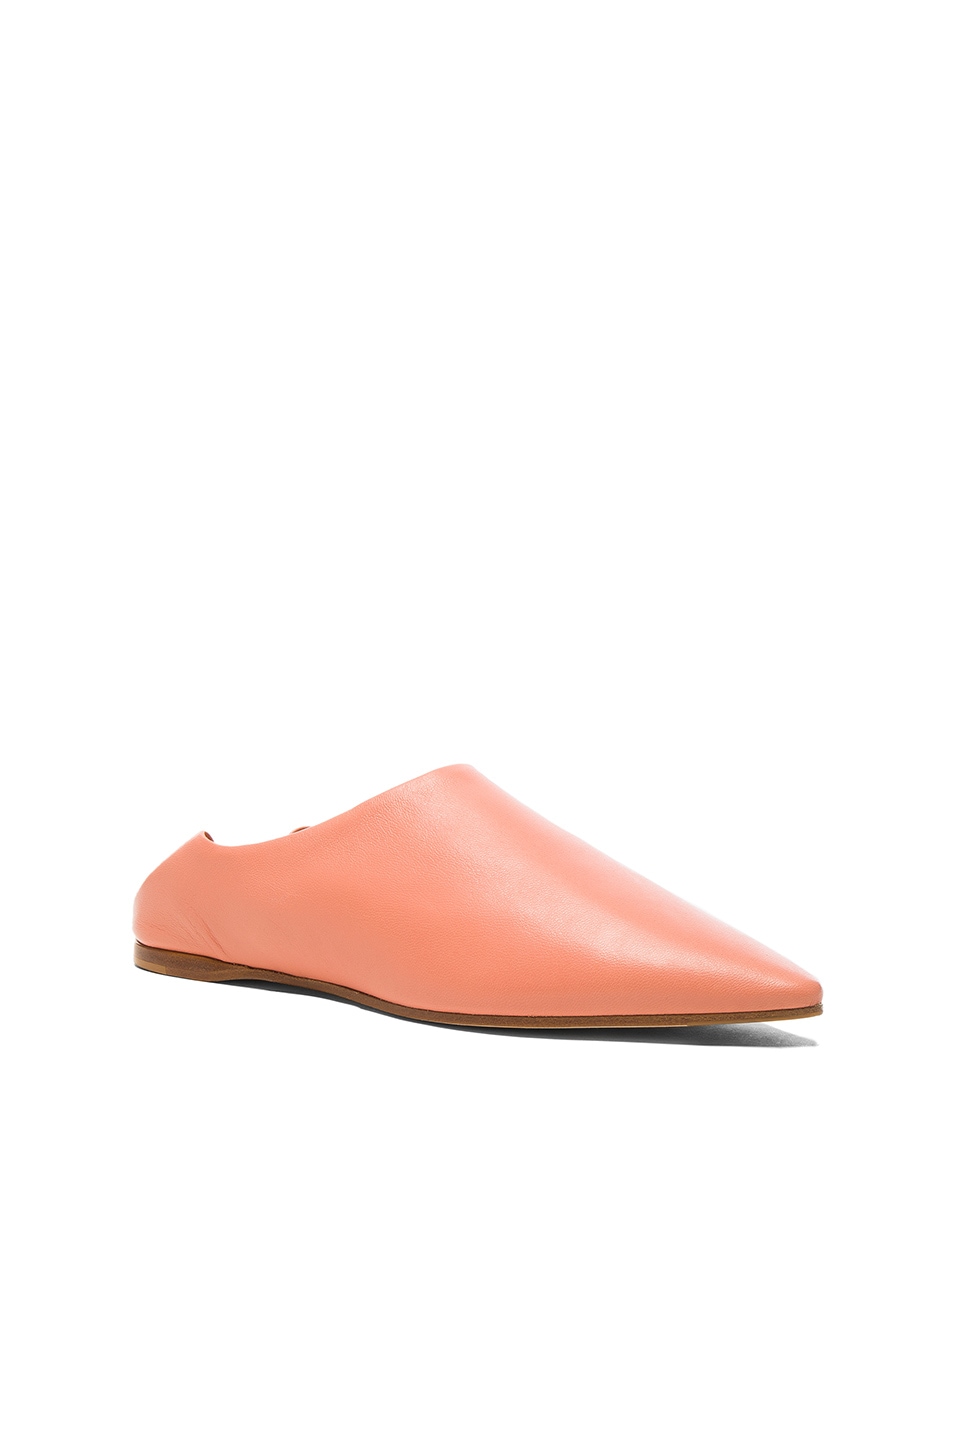 Acne Studios Leather Amina Babouche Slippers in Pink | FWRD